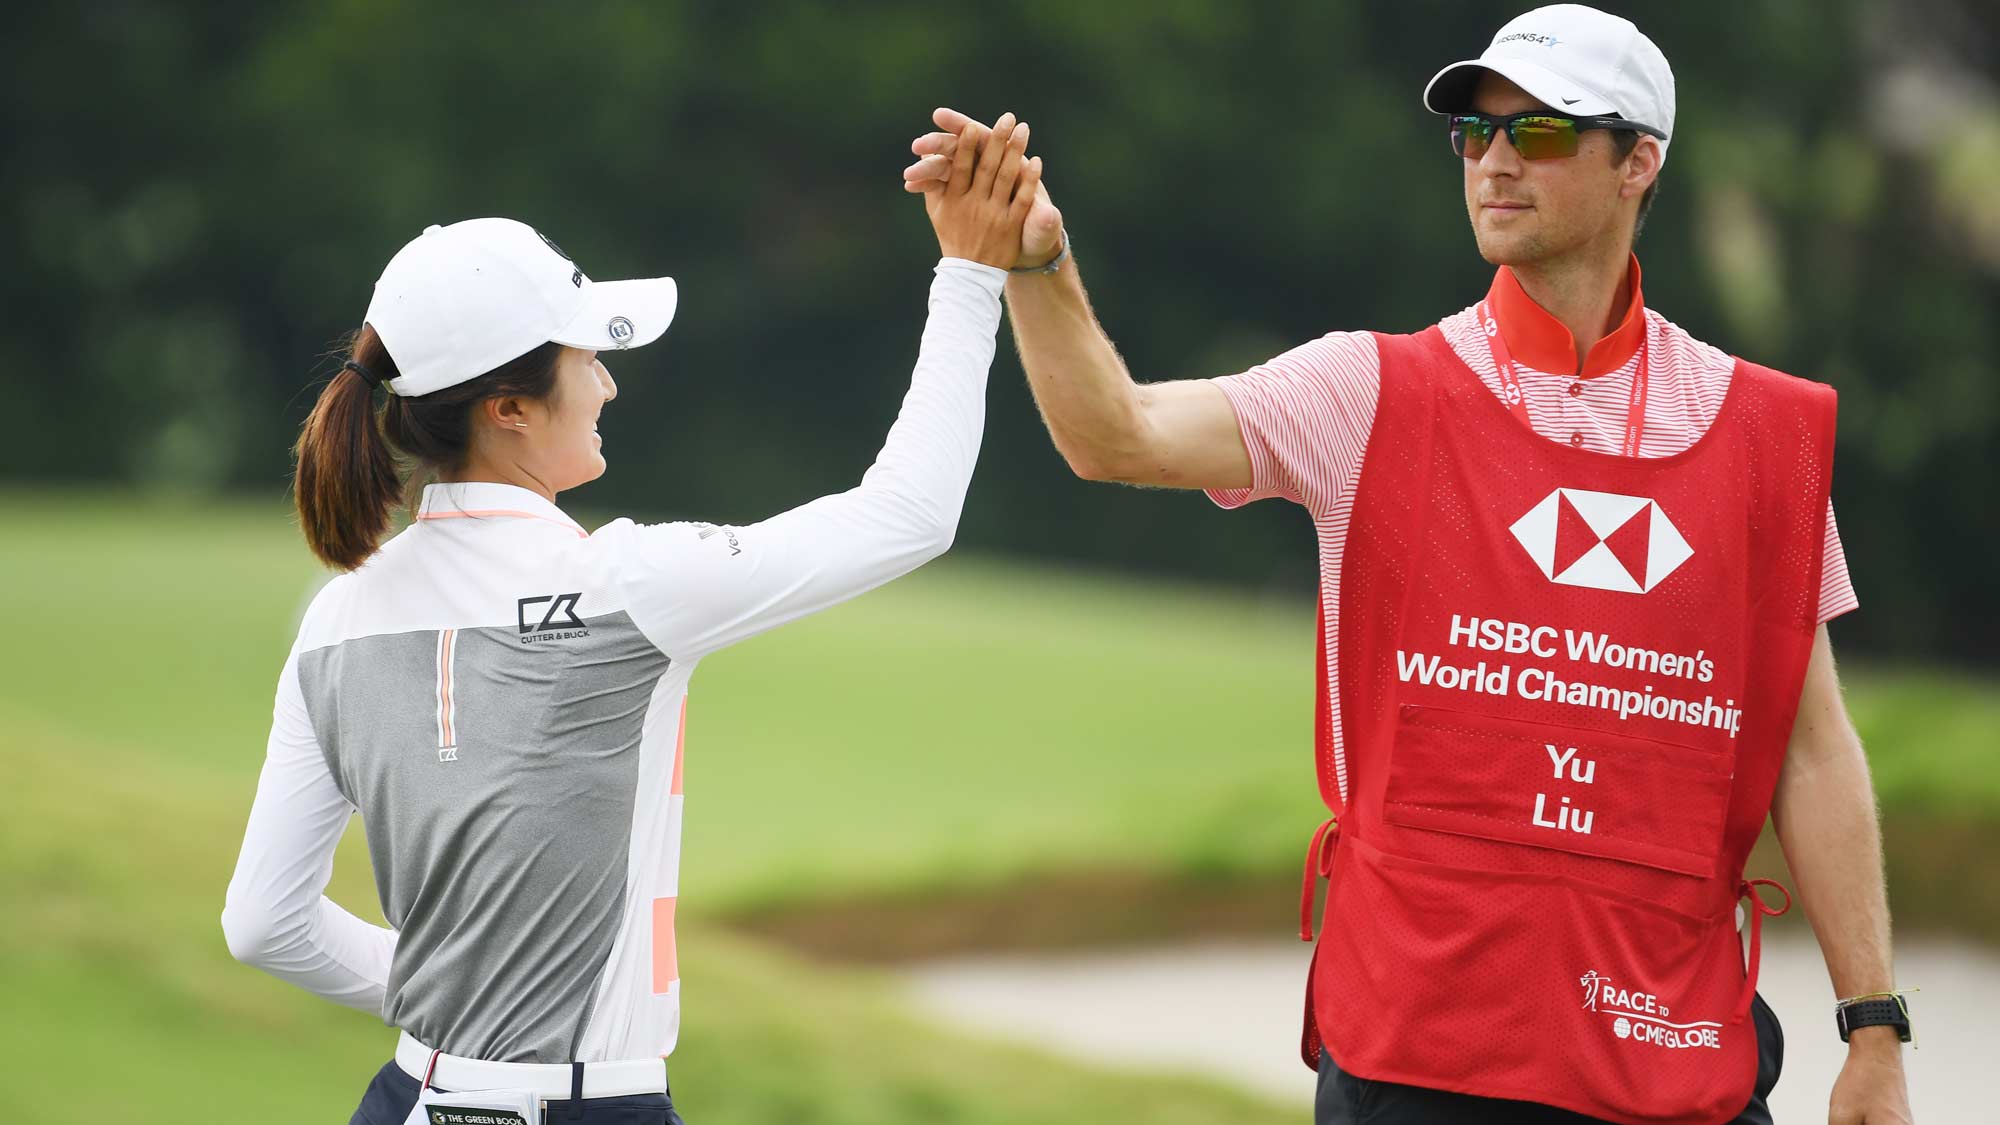 Yu Liu of China celebrates with her caddie on the 18th hole during the first round of the HSBC Women's World Championship at Sentosa Golf Club on February 28, 2019 in Singapore. 